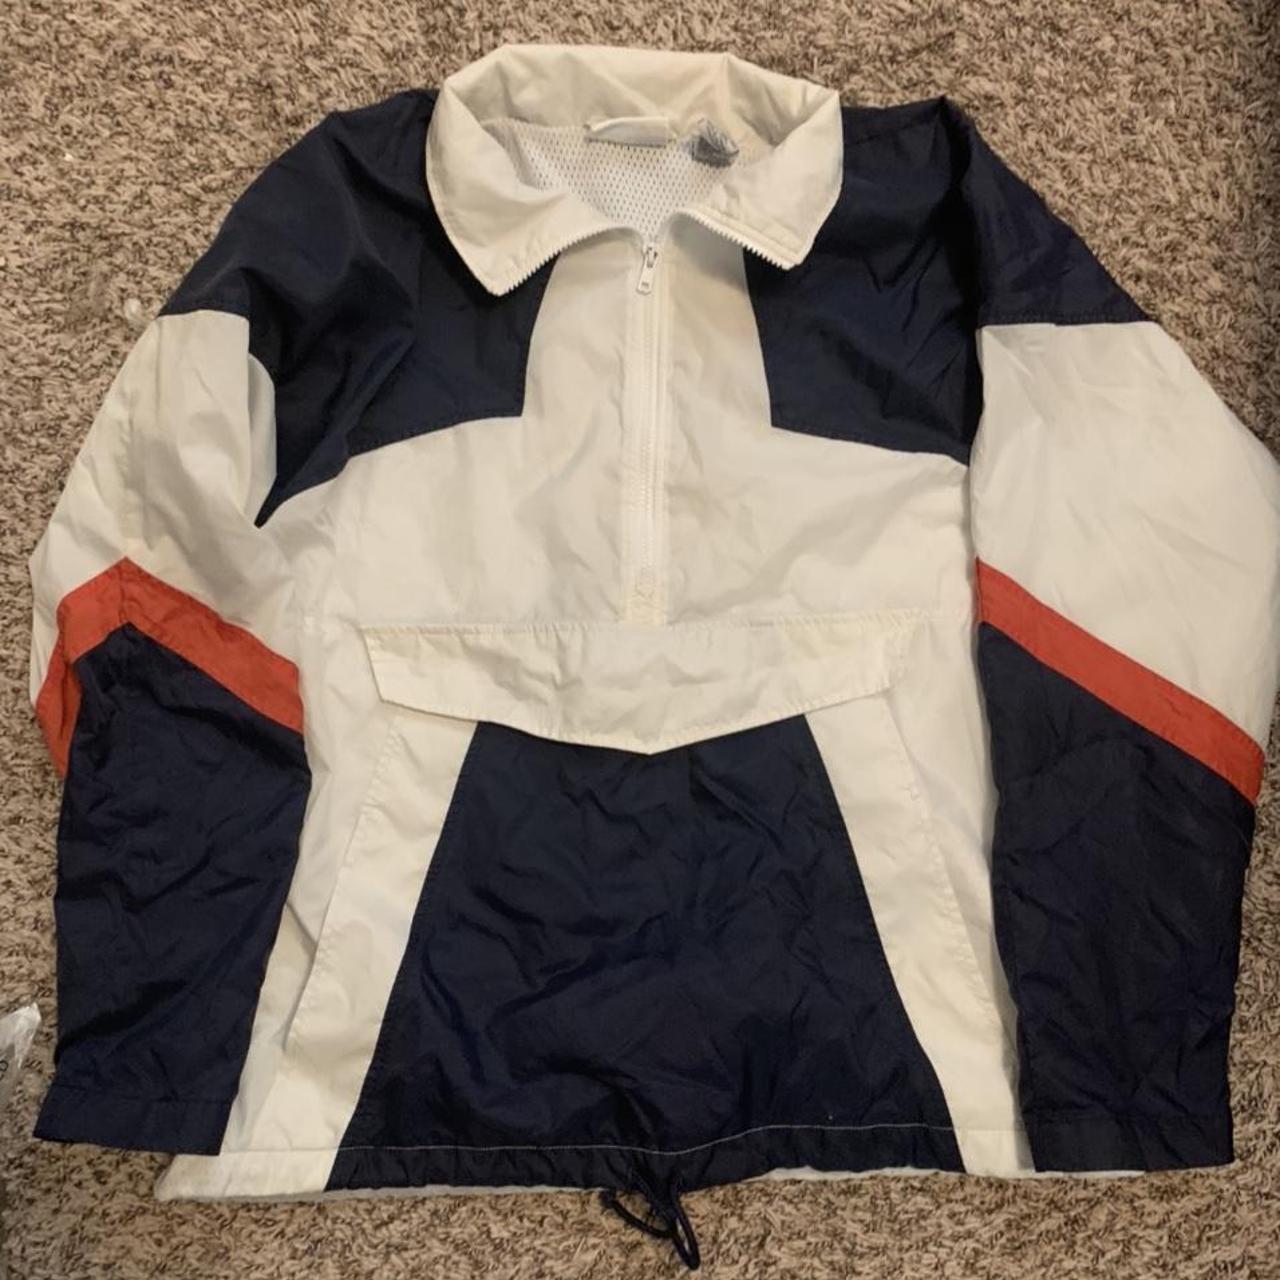 American Vintage Men's White and Blue Jacket